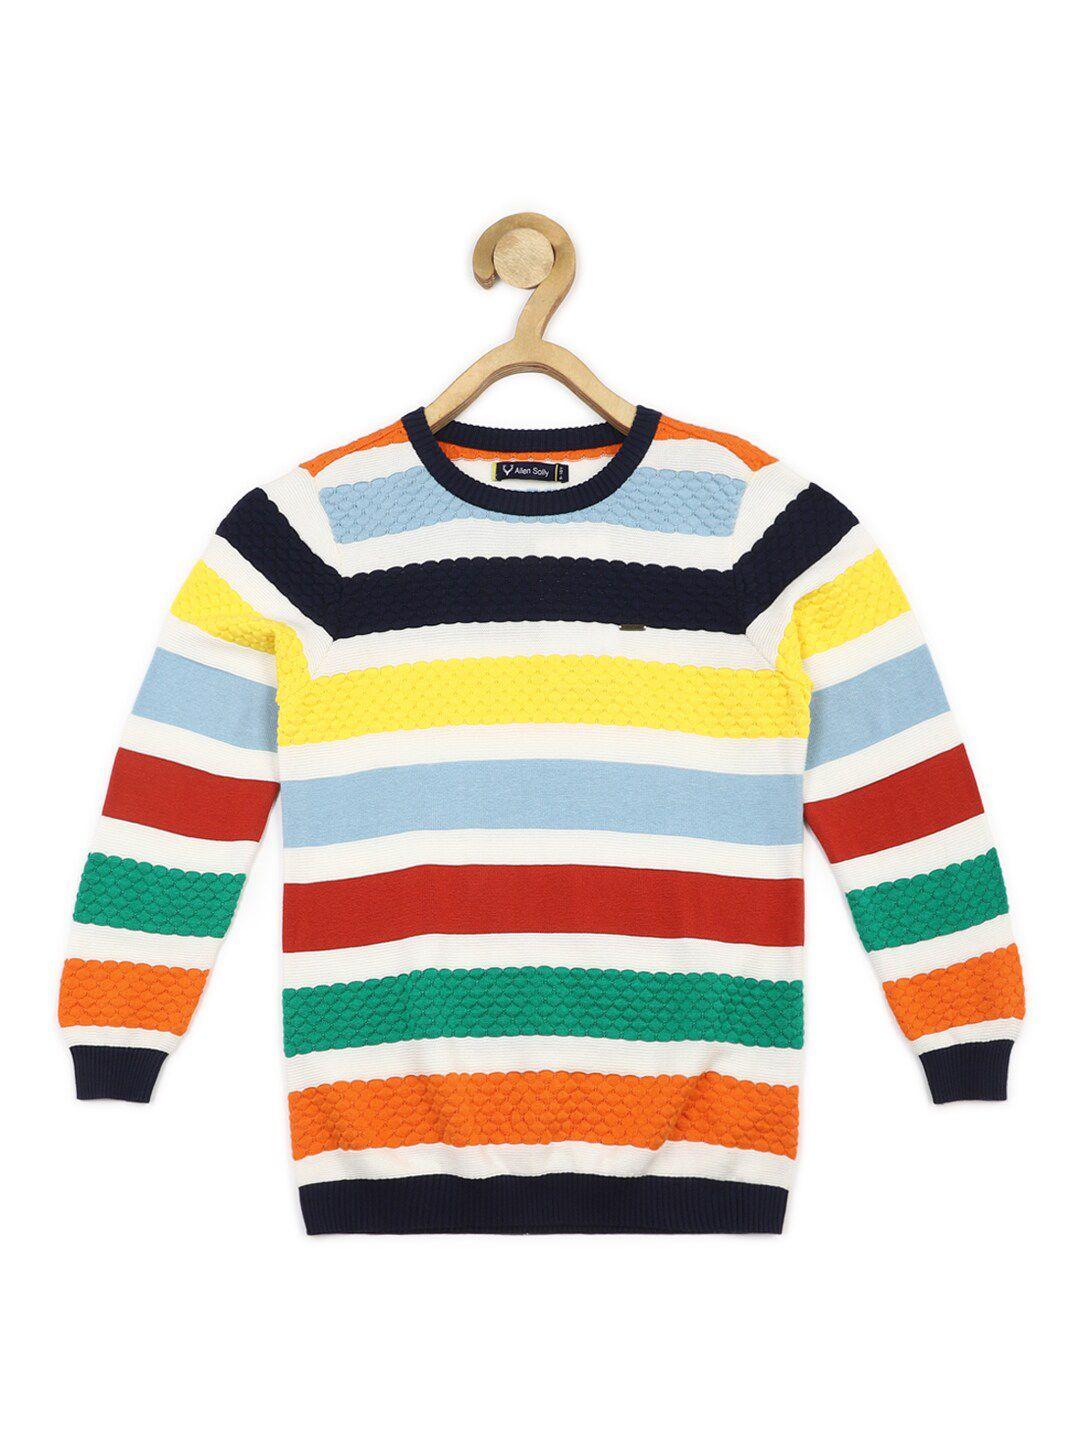 allen solly junior boys striped round neck long sleeves cotton pullover sweaters